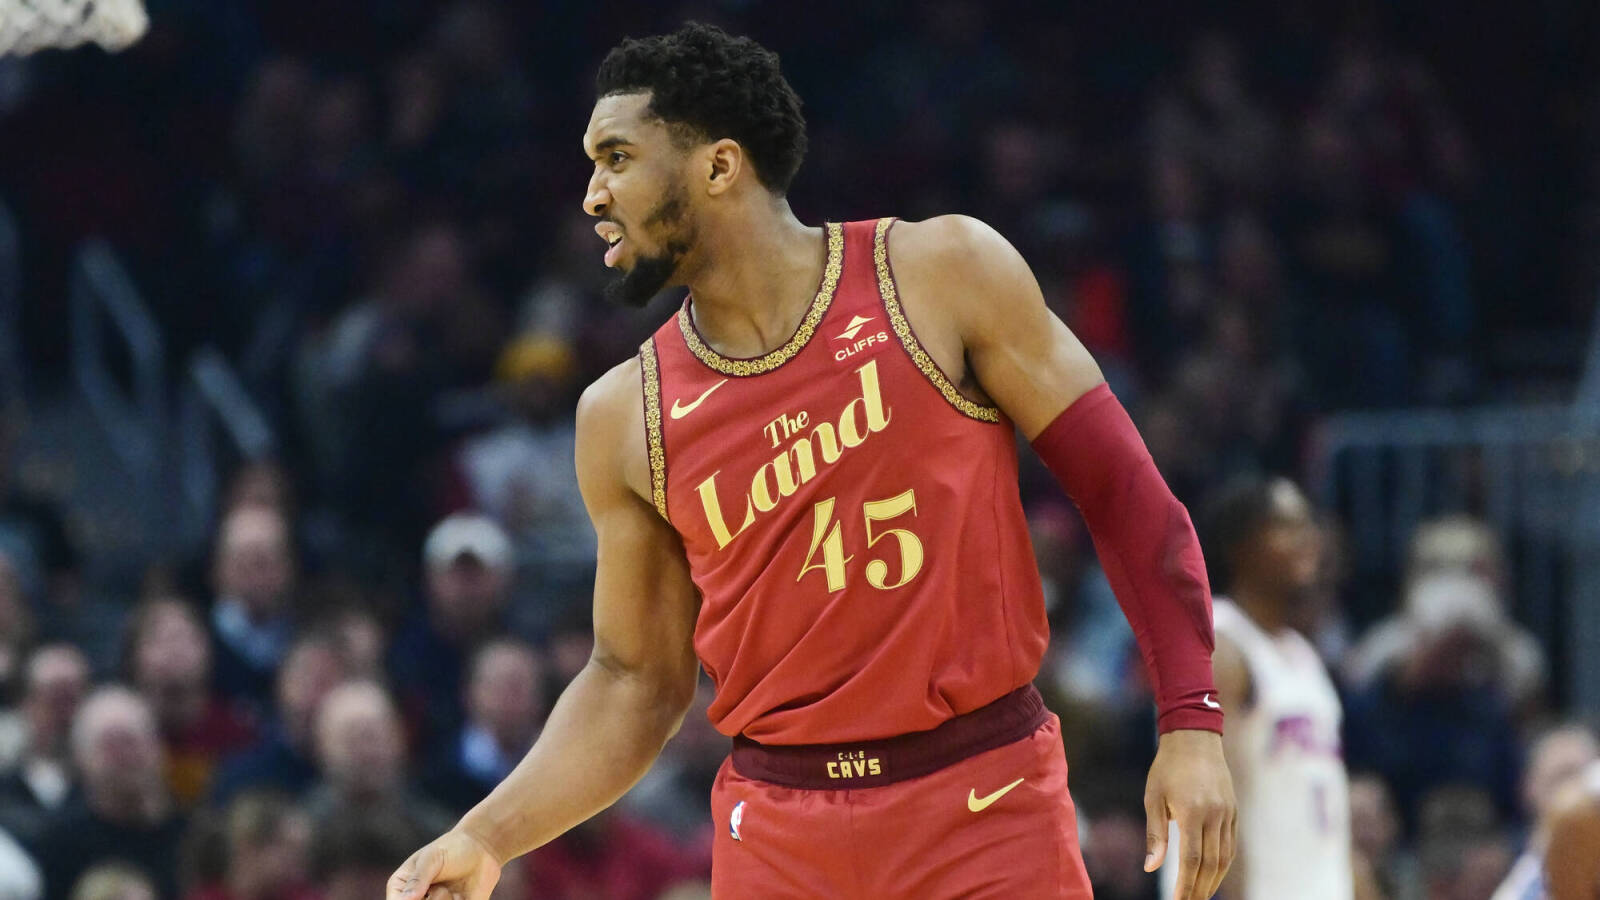 NBA exec expects Donovan Mitchell to leave Cavs next year